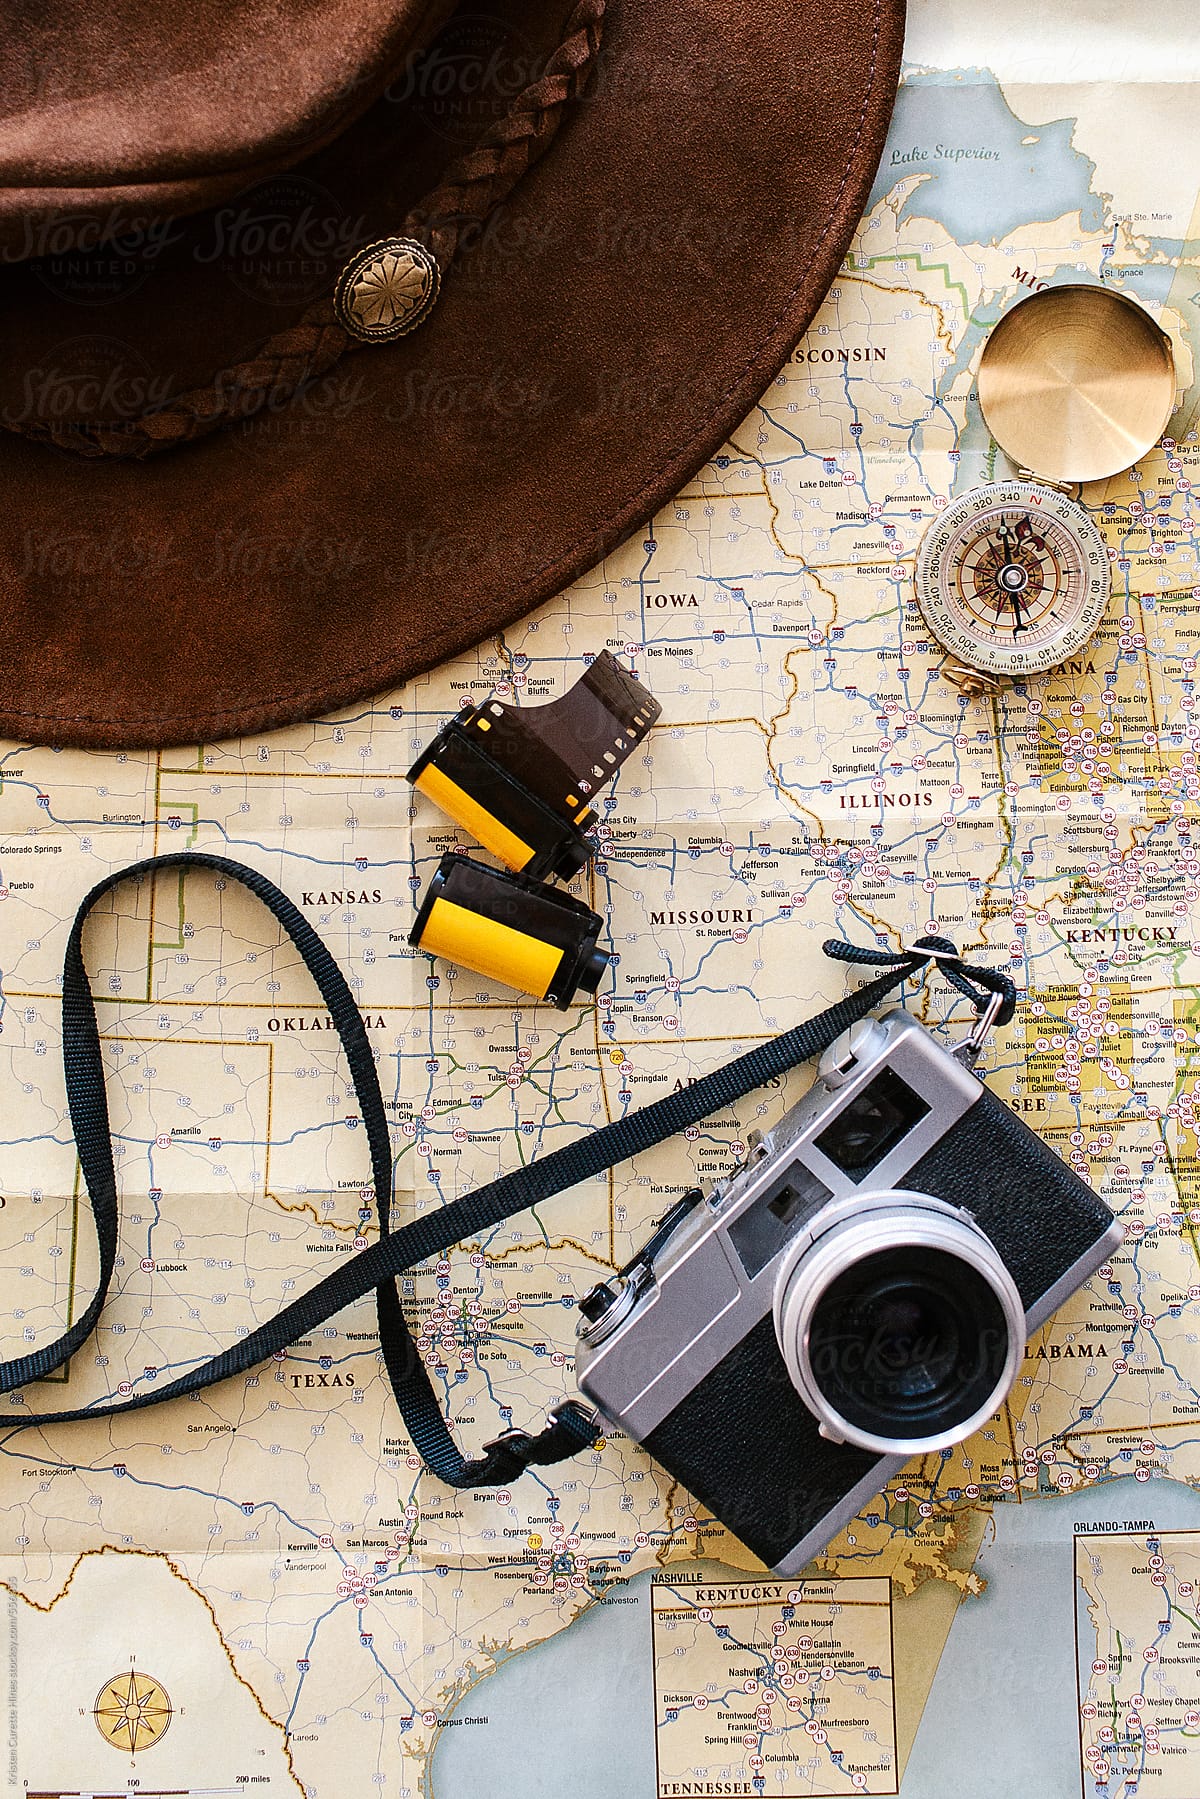 Planning a roadtrip with a film camera